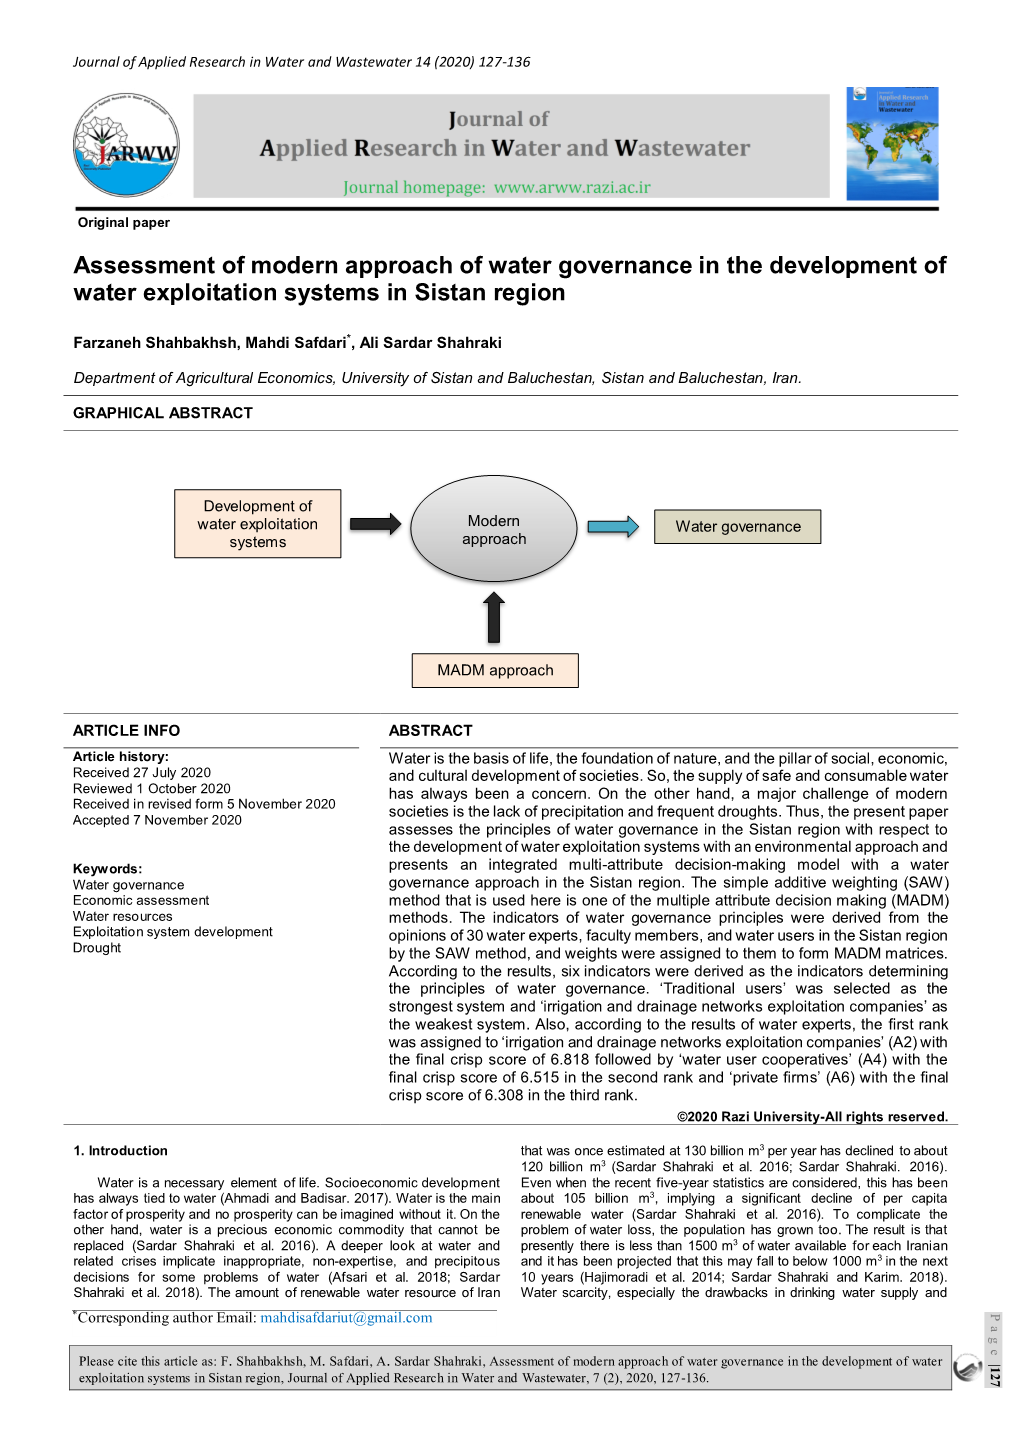 Assessment of Modern Approach of Water Governance in the Development of Water Exploitation Systems in Sistan Region